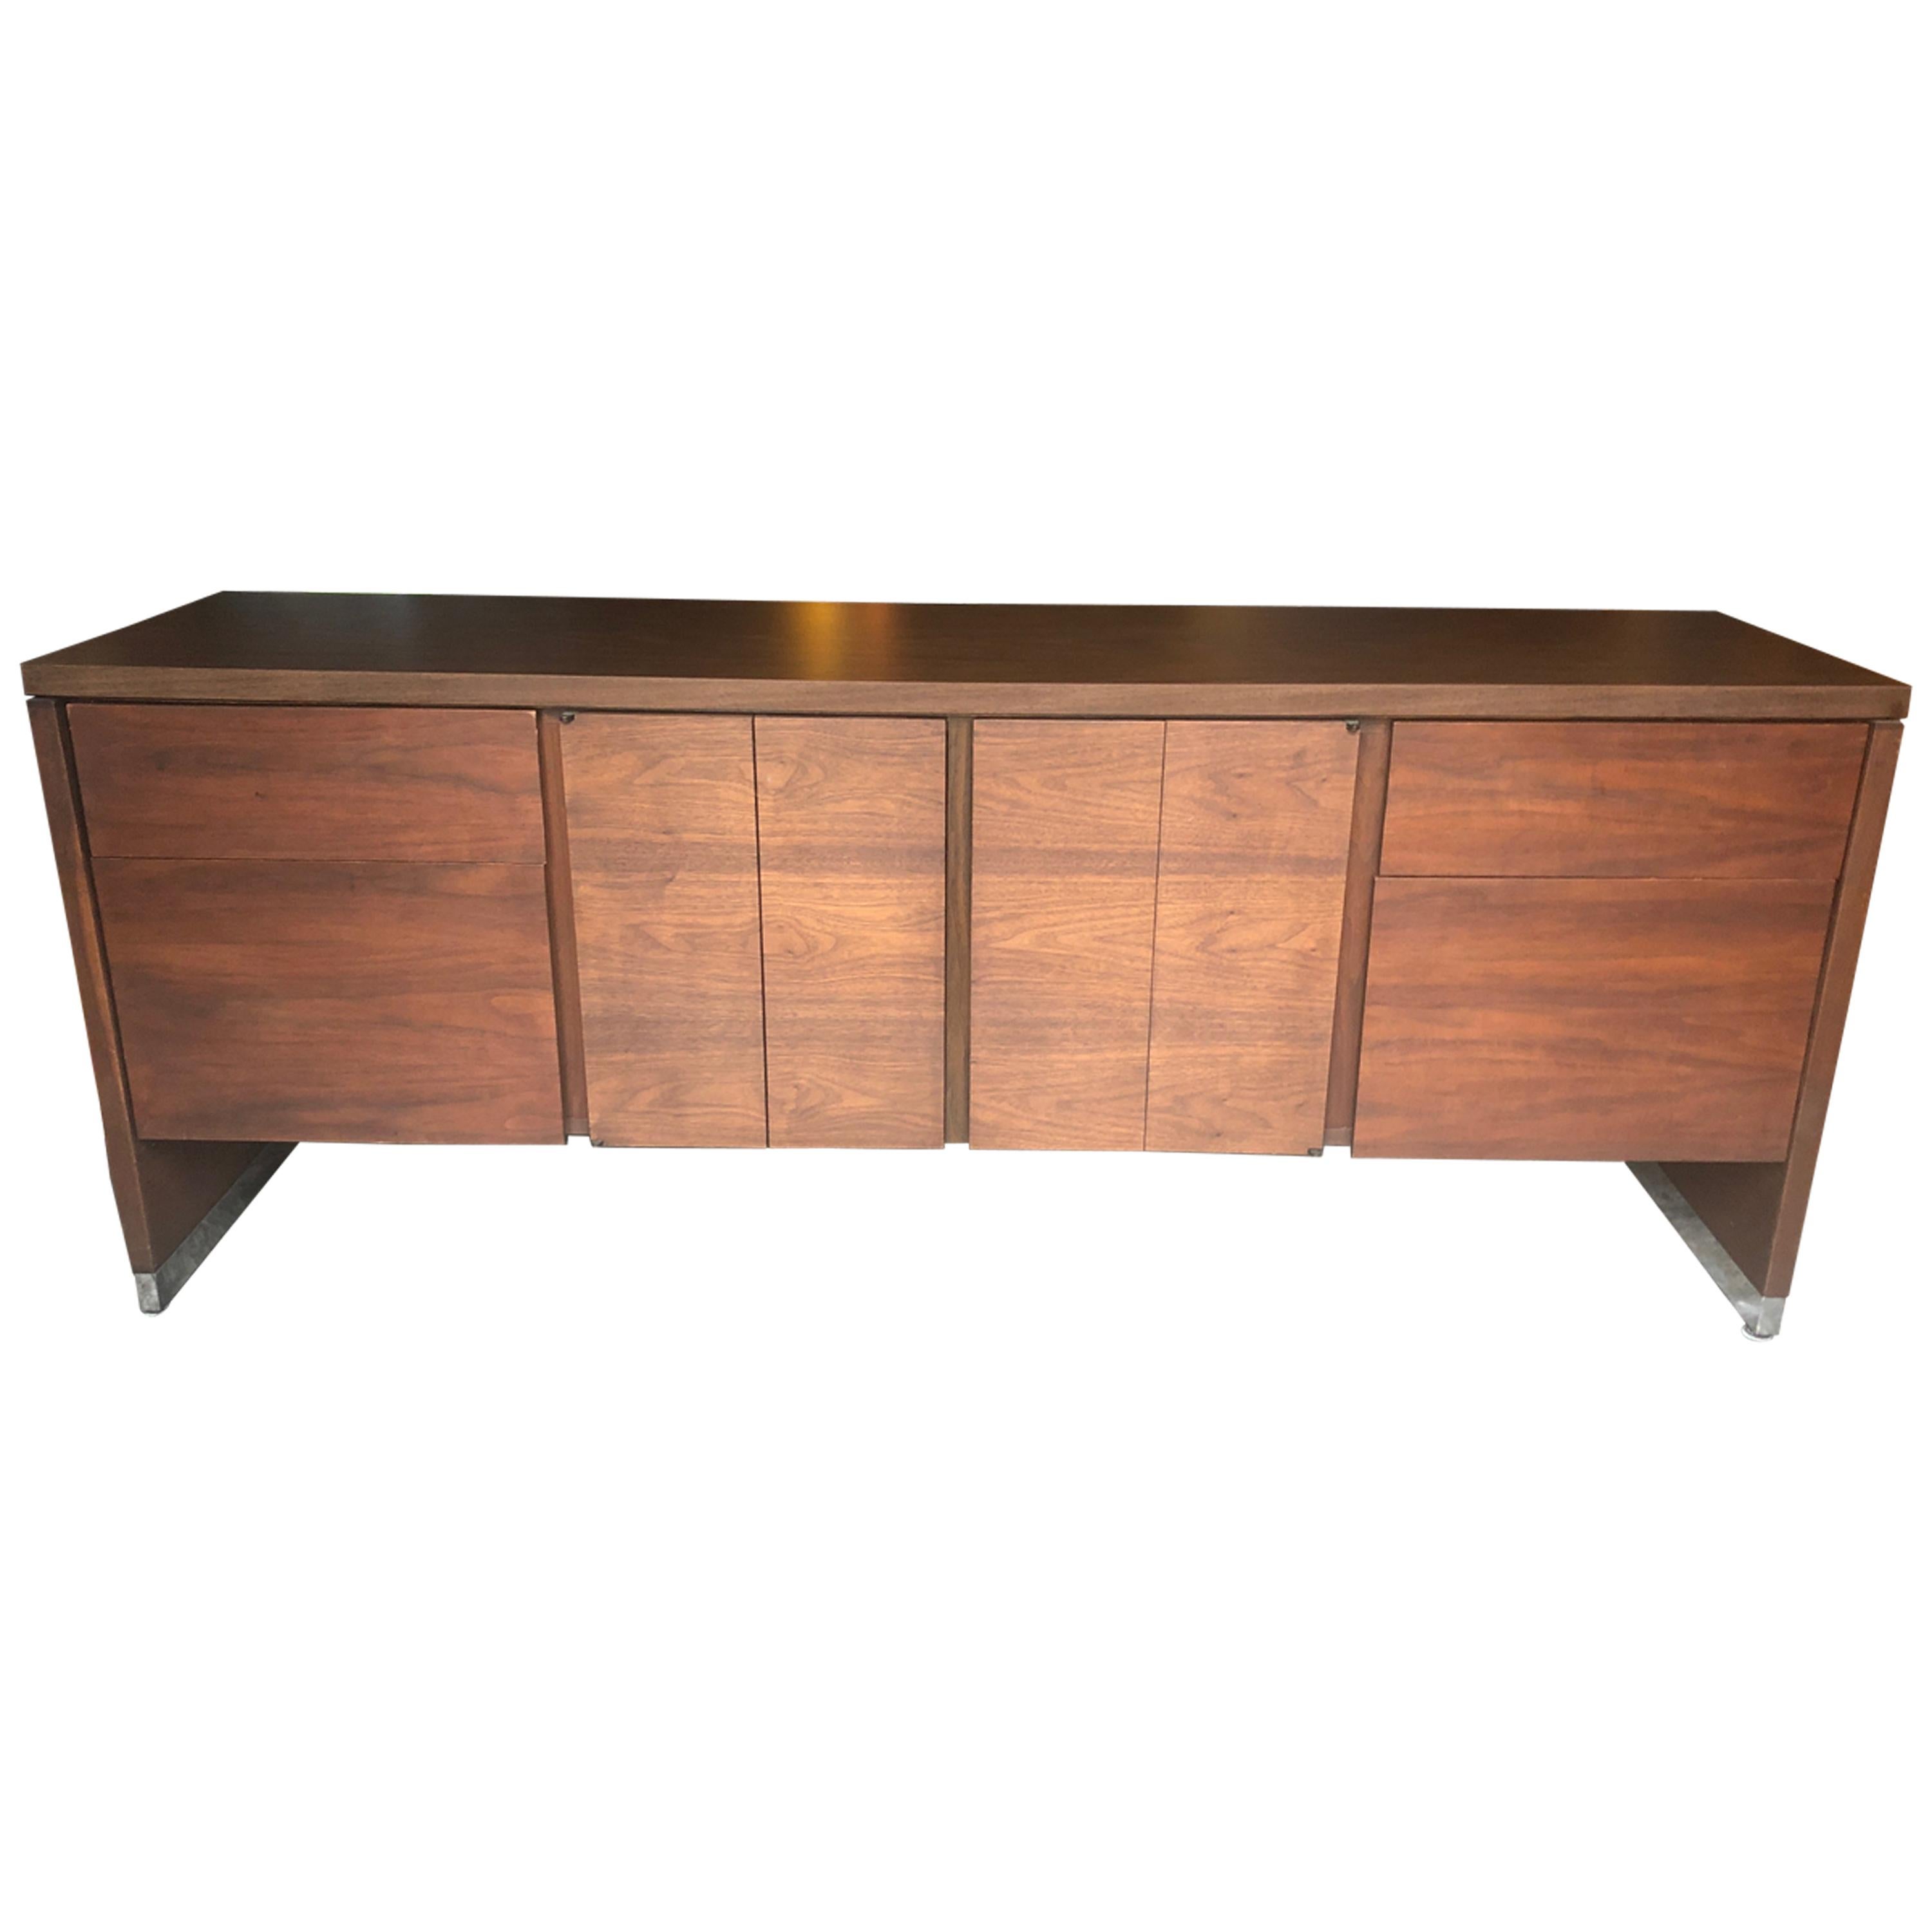 Sophisticated Mid-Century Modern Rectangular Console Cabinet